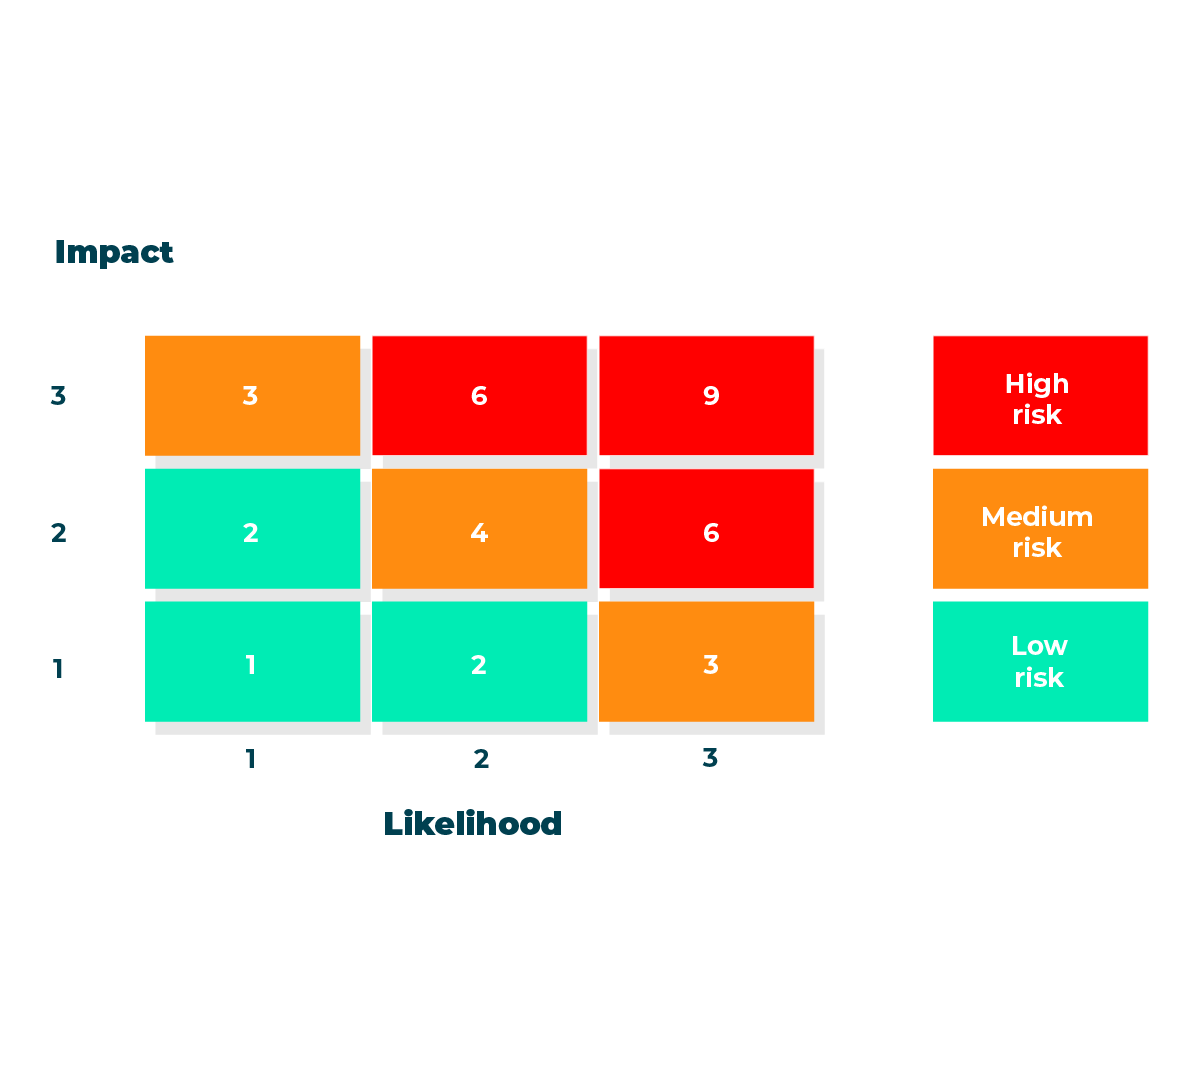 A Risk Matrix displaying three separate levels of impact and likelihood, high, medium, and low. You look to where both your impact and likelihood criteria meet to get your risk rating of high risk, medium risk, or low risk.